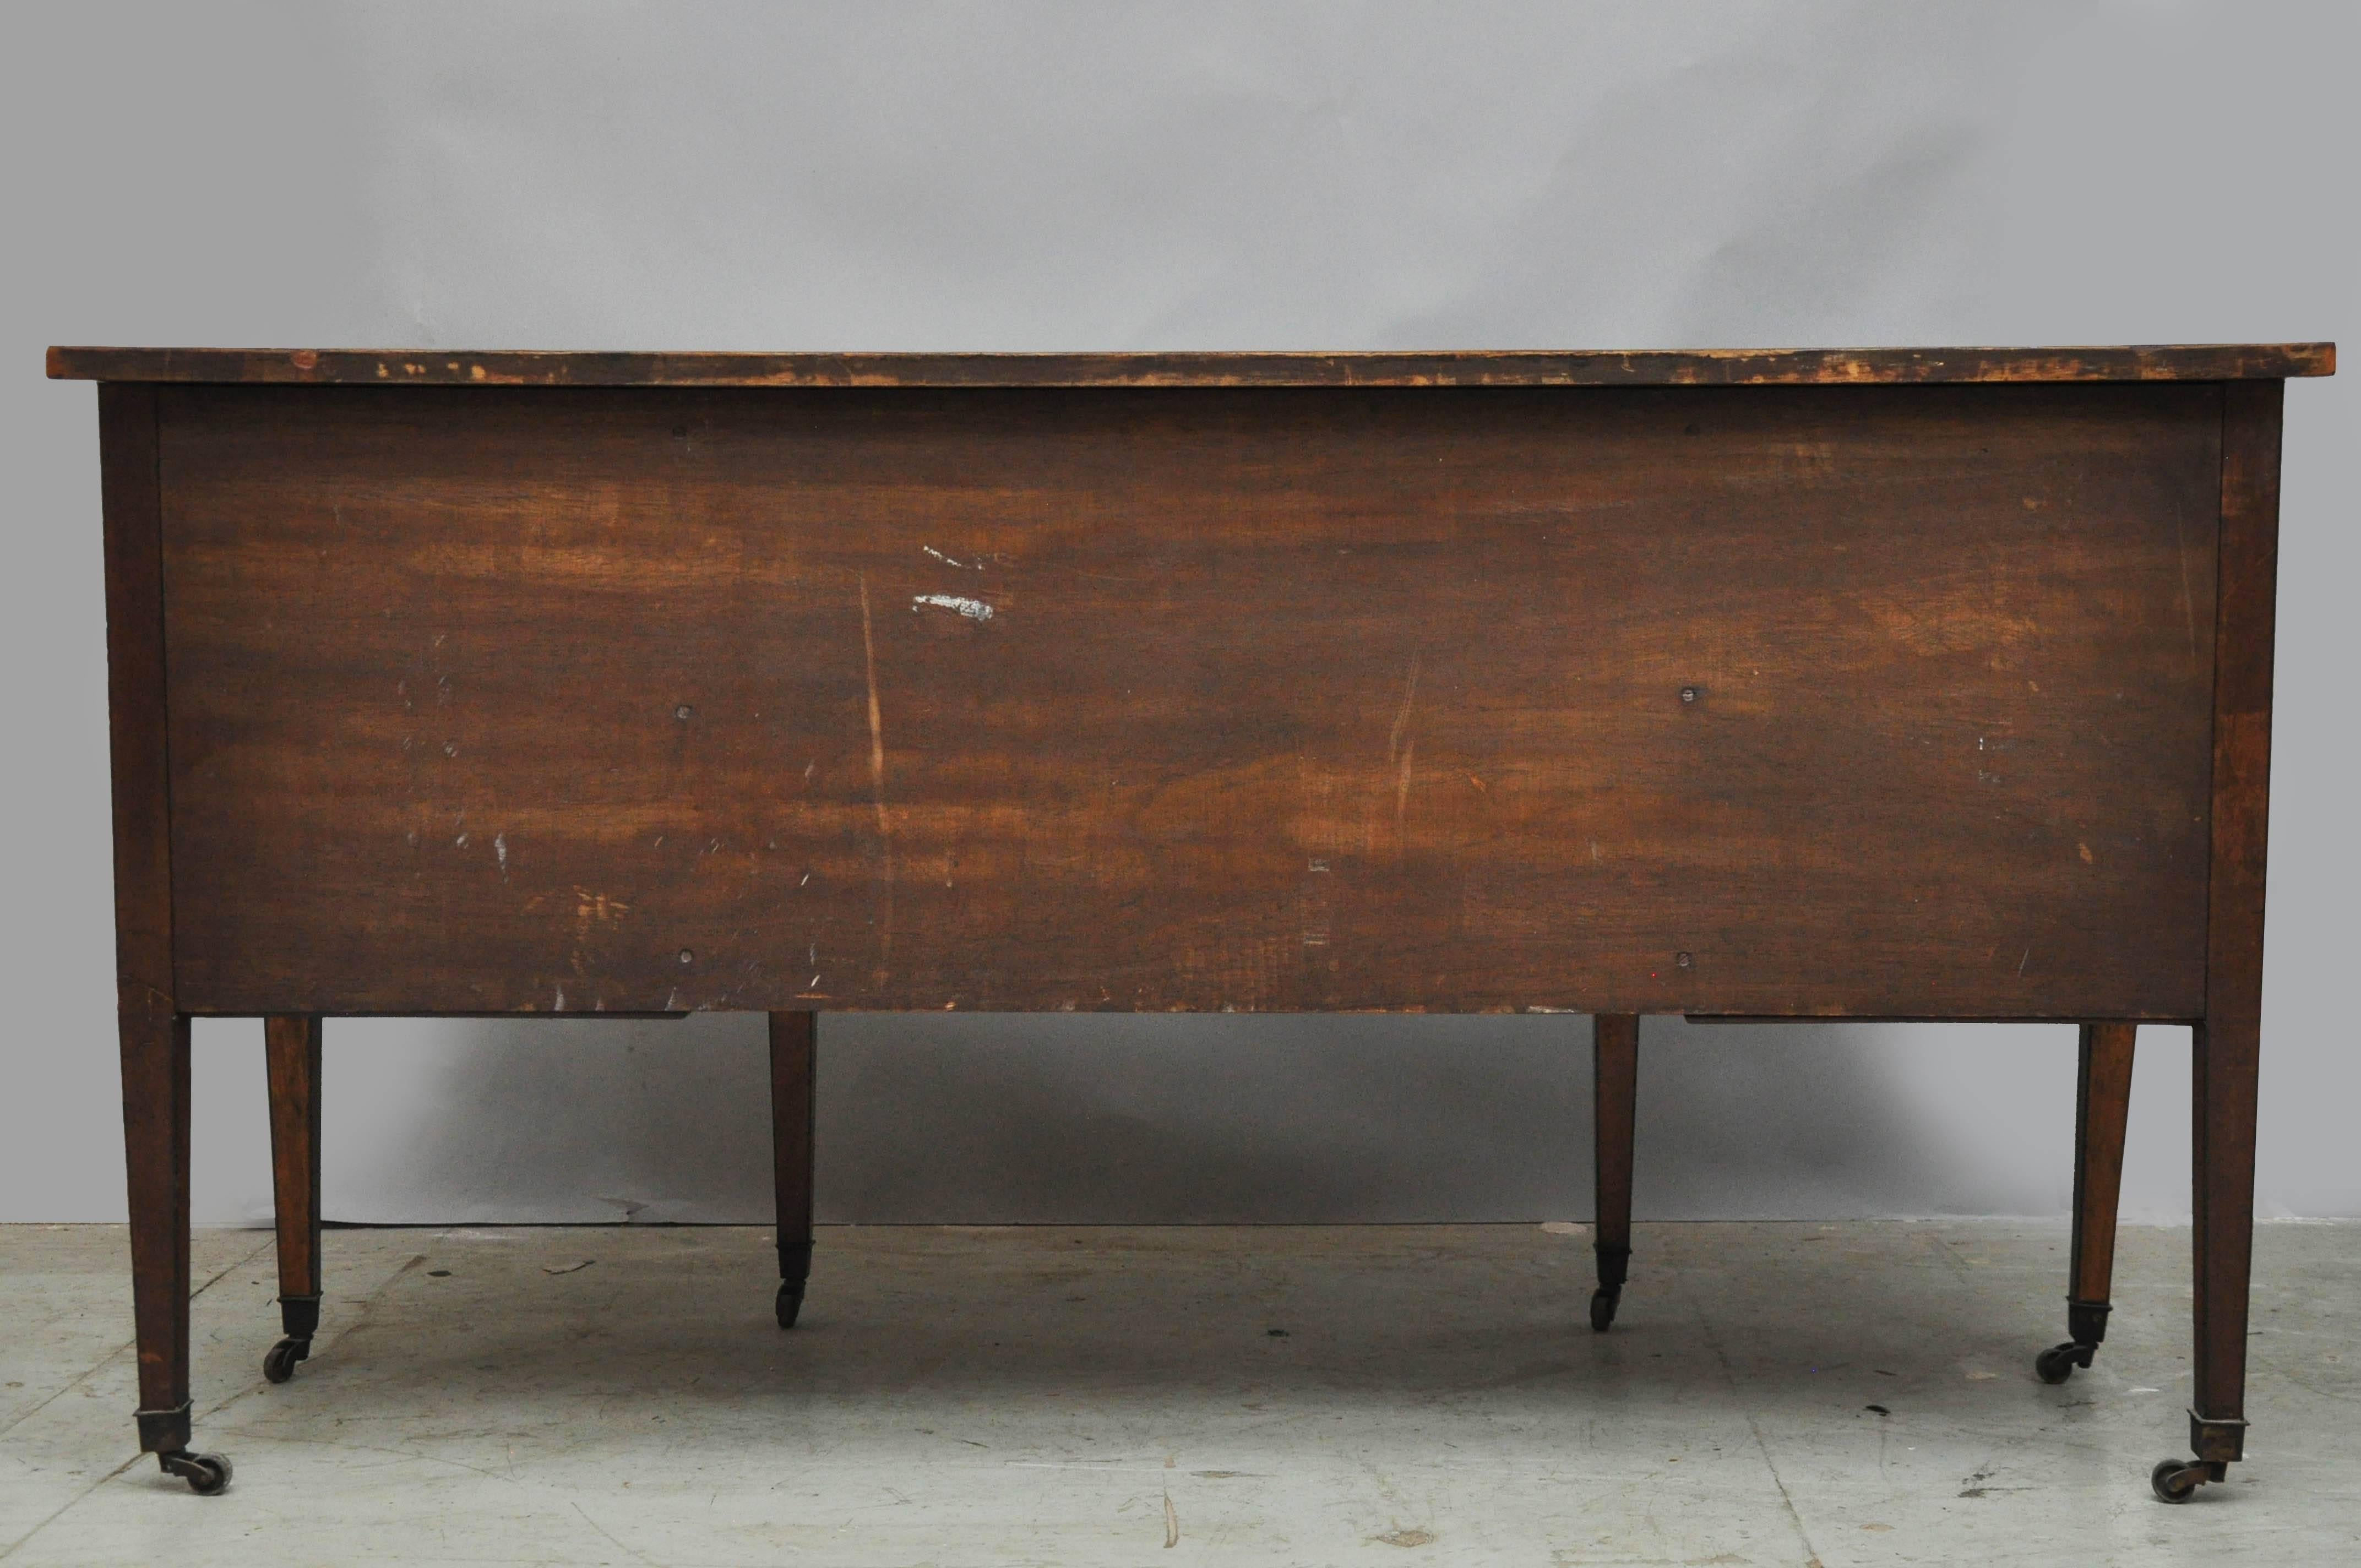 Edwardian Period Sheraton Revival Writing Table by Maple & Co. of London, 1905 For Sale 2